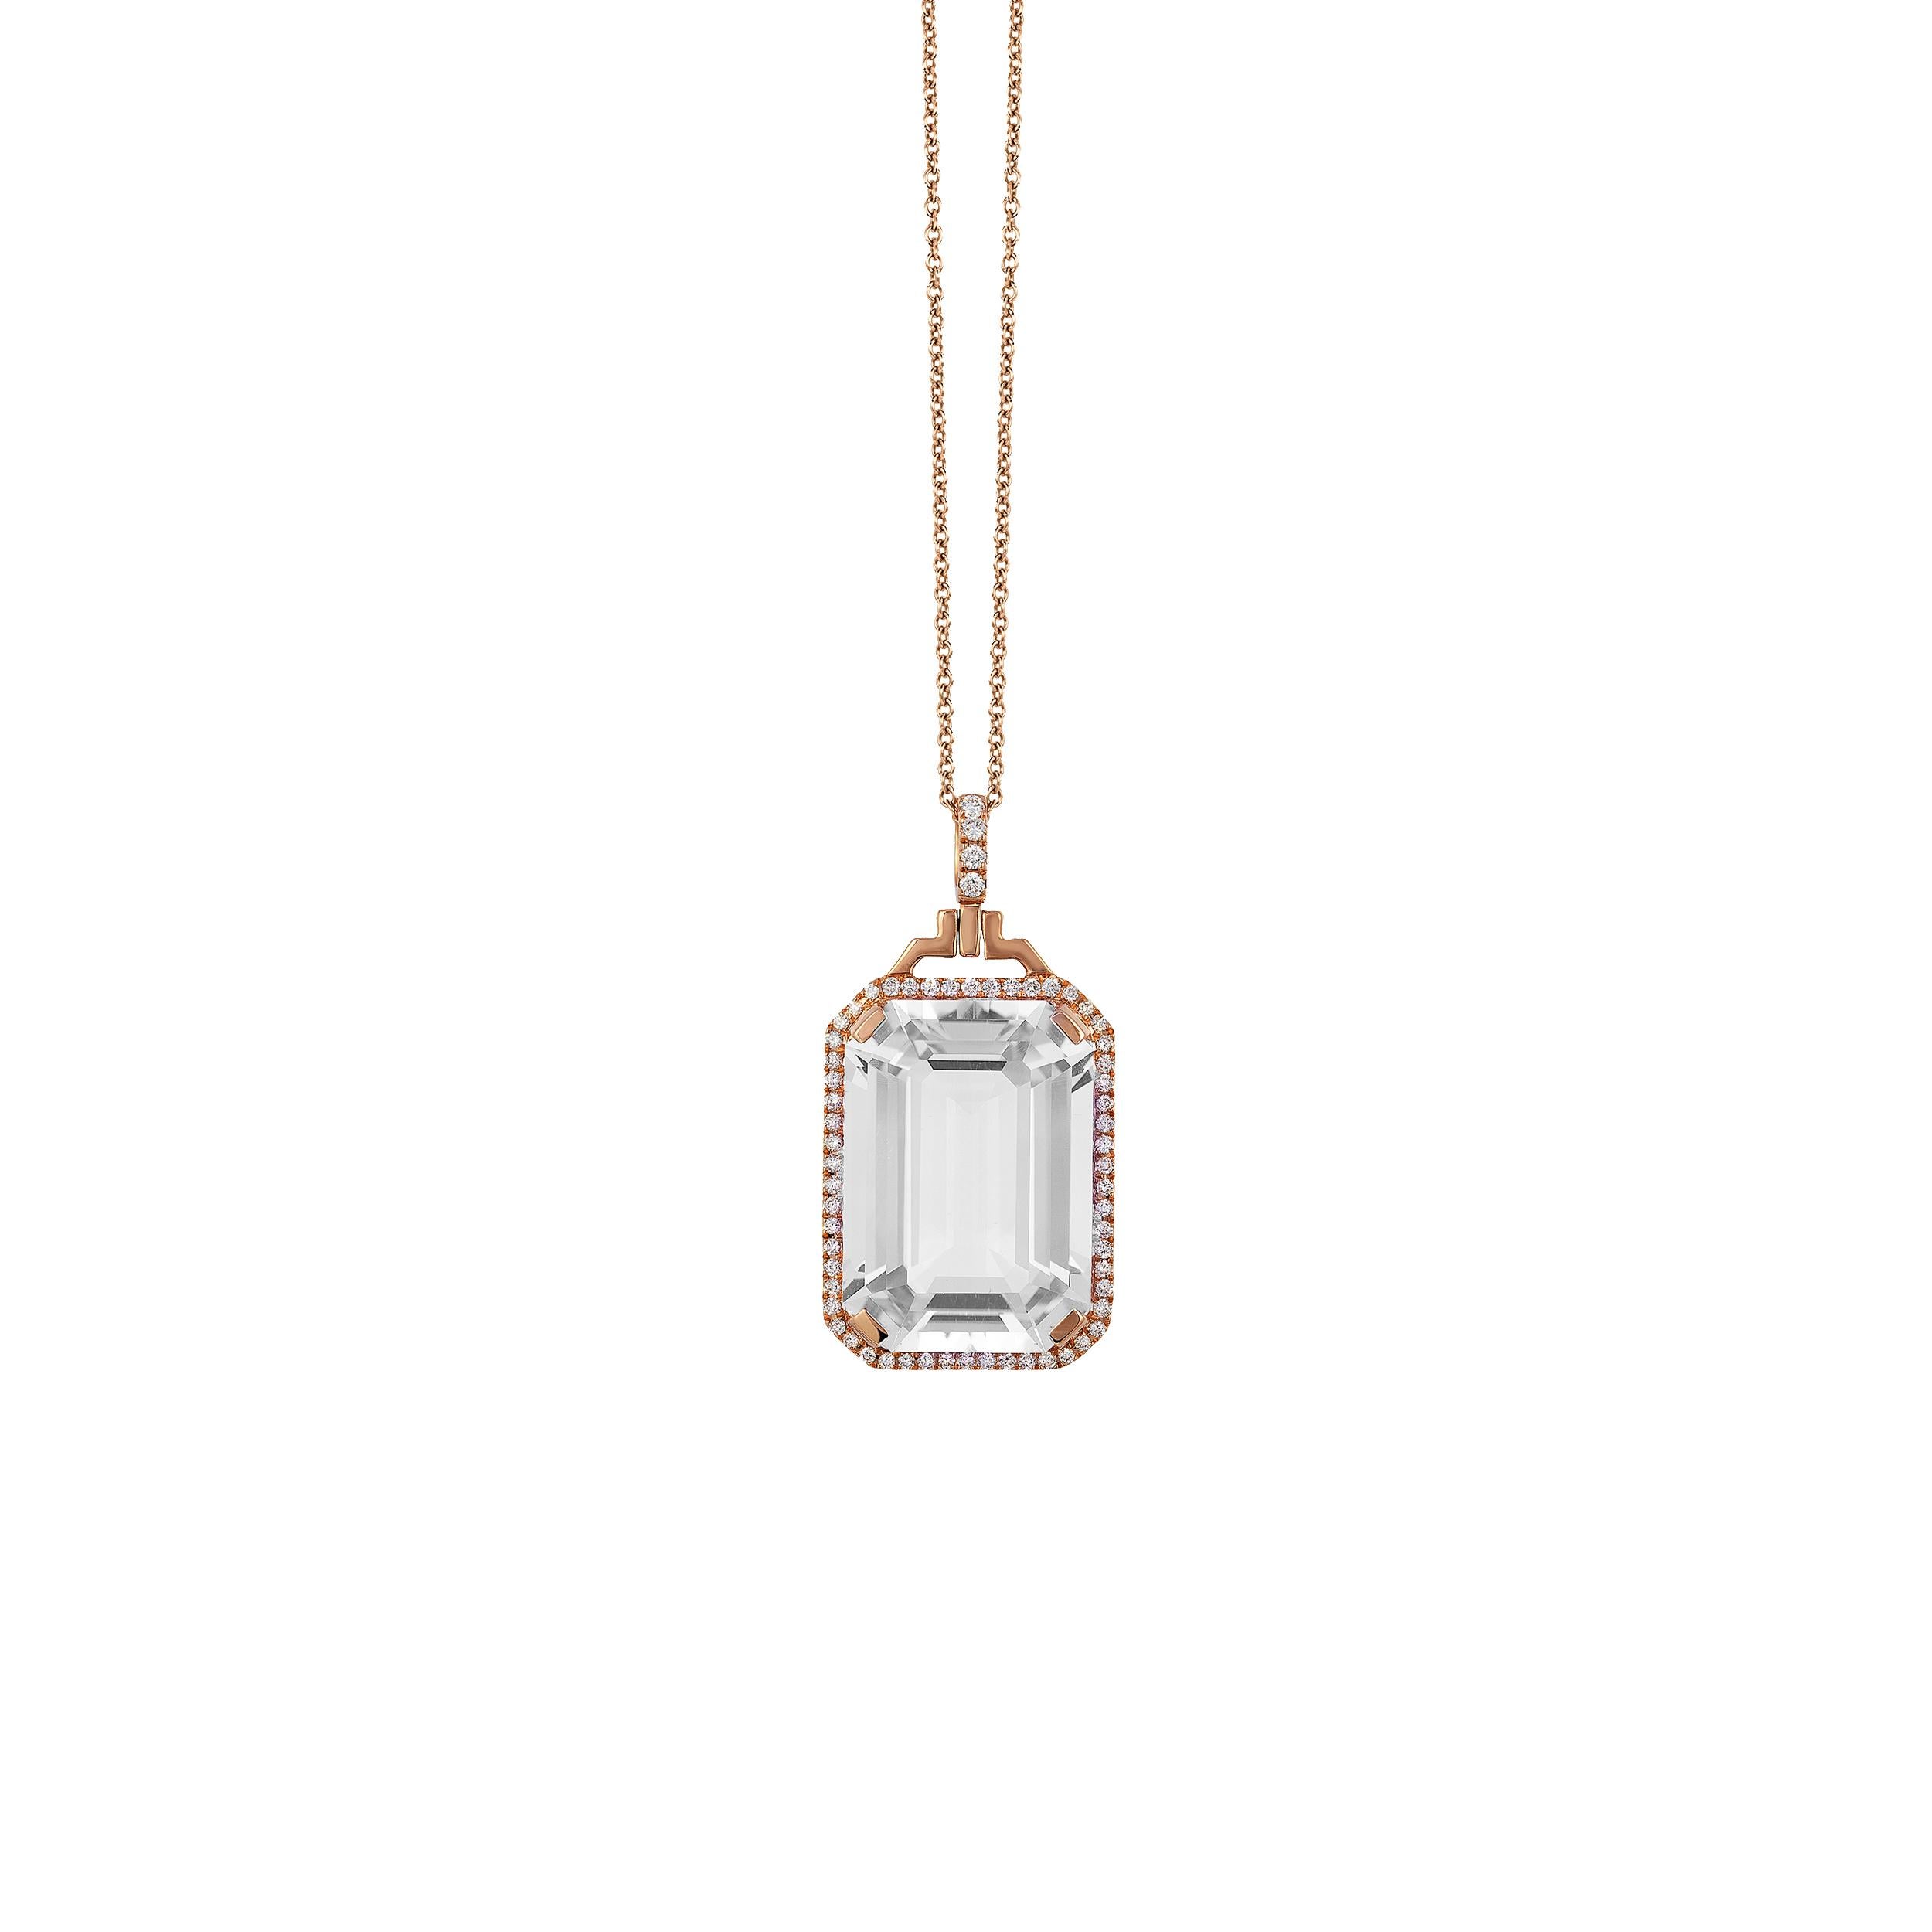 Rock Crystal Emerald Cut Pendant with Diamonds in 18K Pink Gold, from 'Gossip' Collection 
 
 on a 18'' Chain
 
 Stone Size: 14 x 20 mm 
 
 Gemstone Approx Wt: Rock Crystal-15.80 Carats 
 
 Diamonds: G-H / VS, Approx Wt : 0.30 Carats